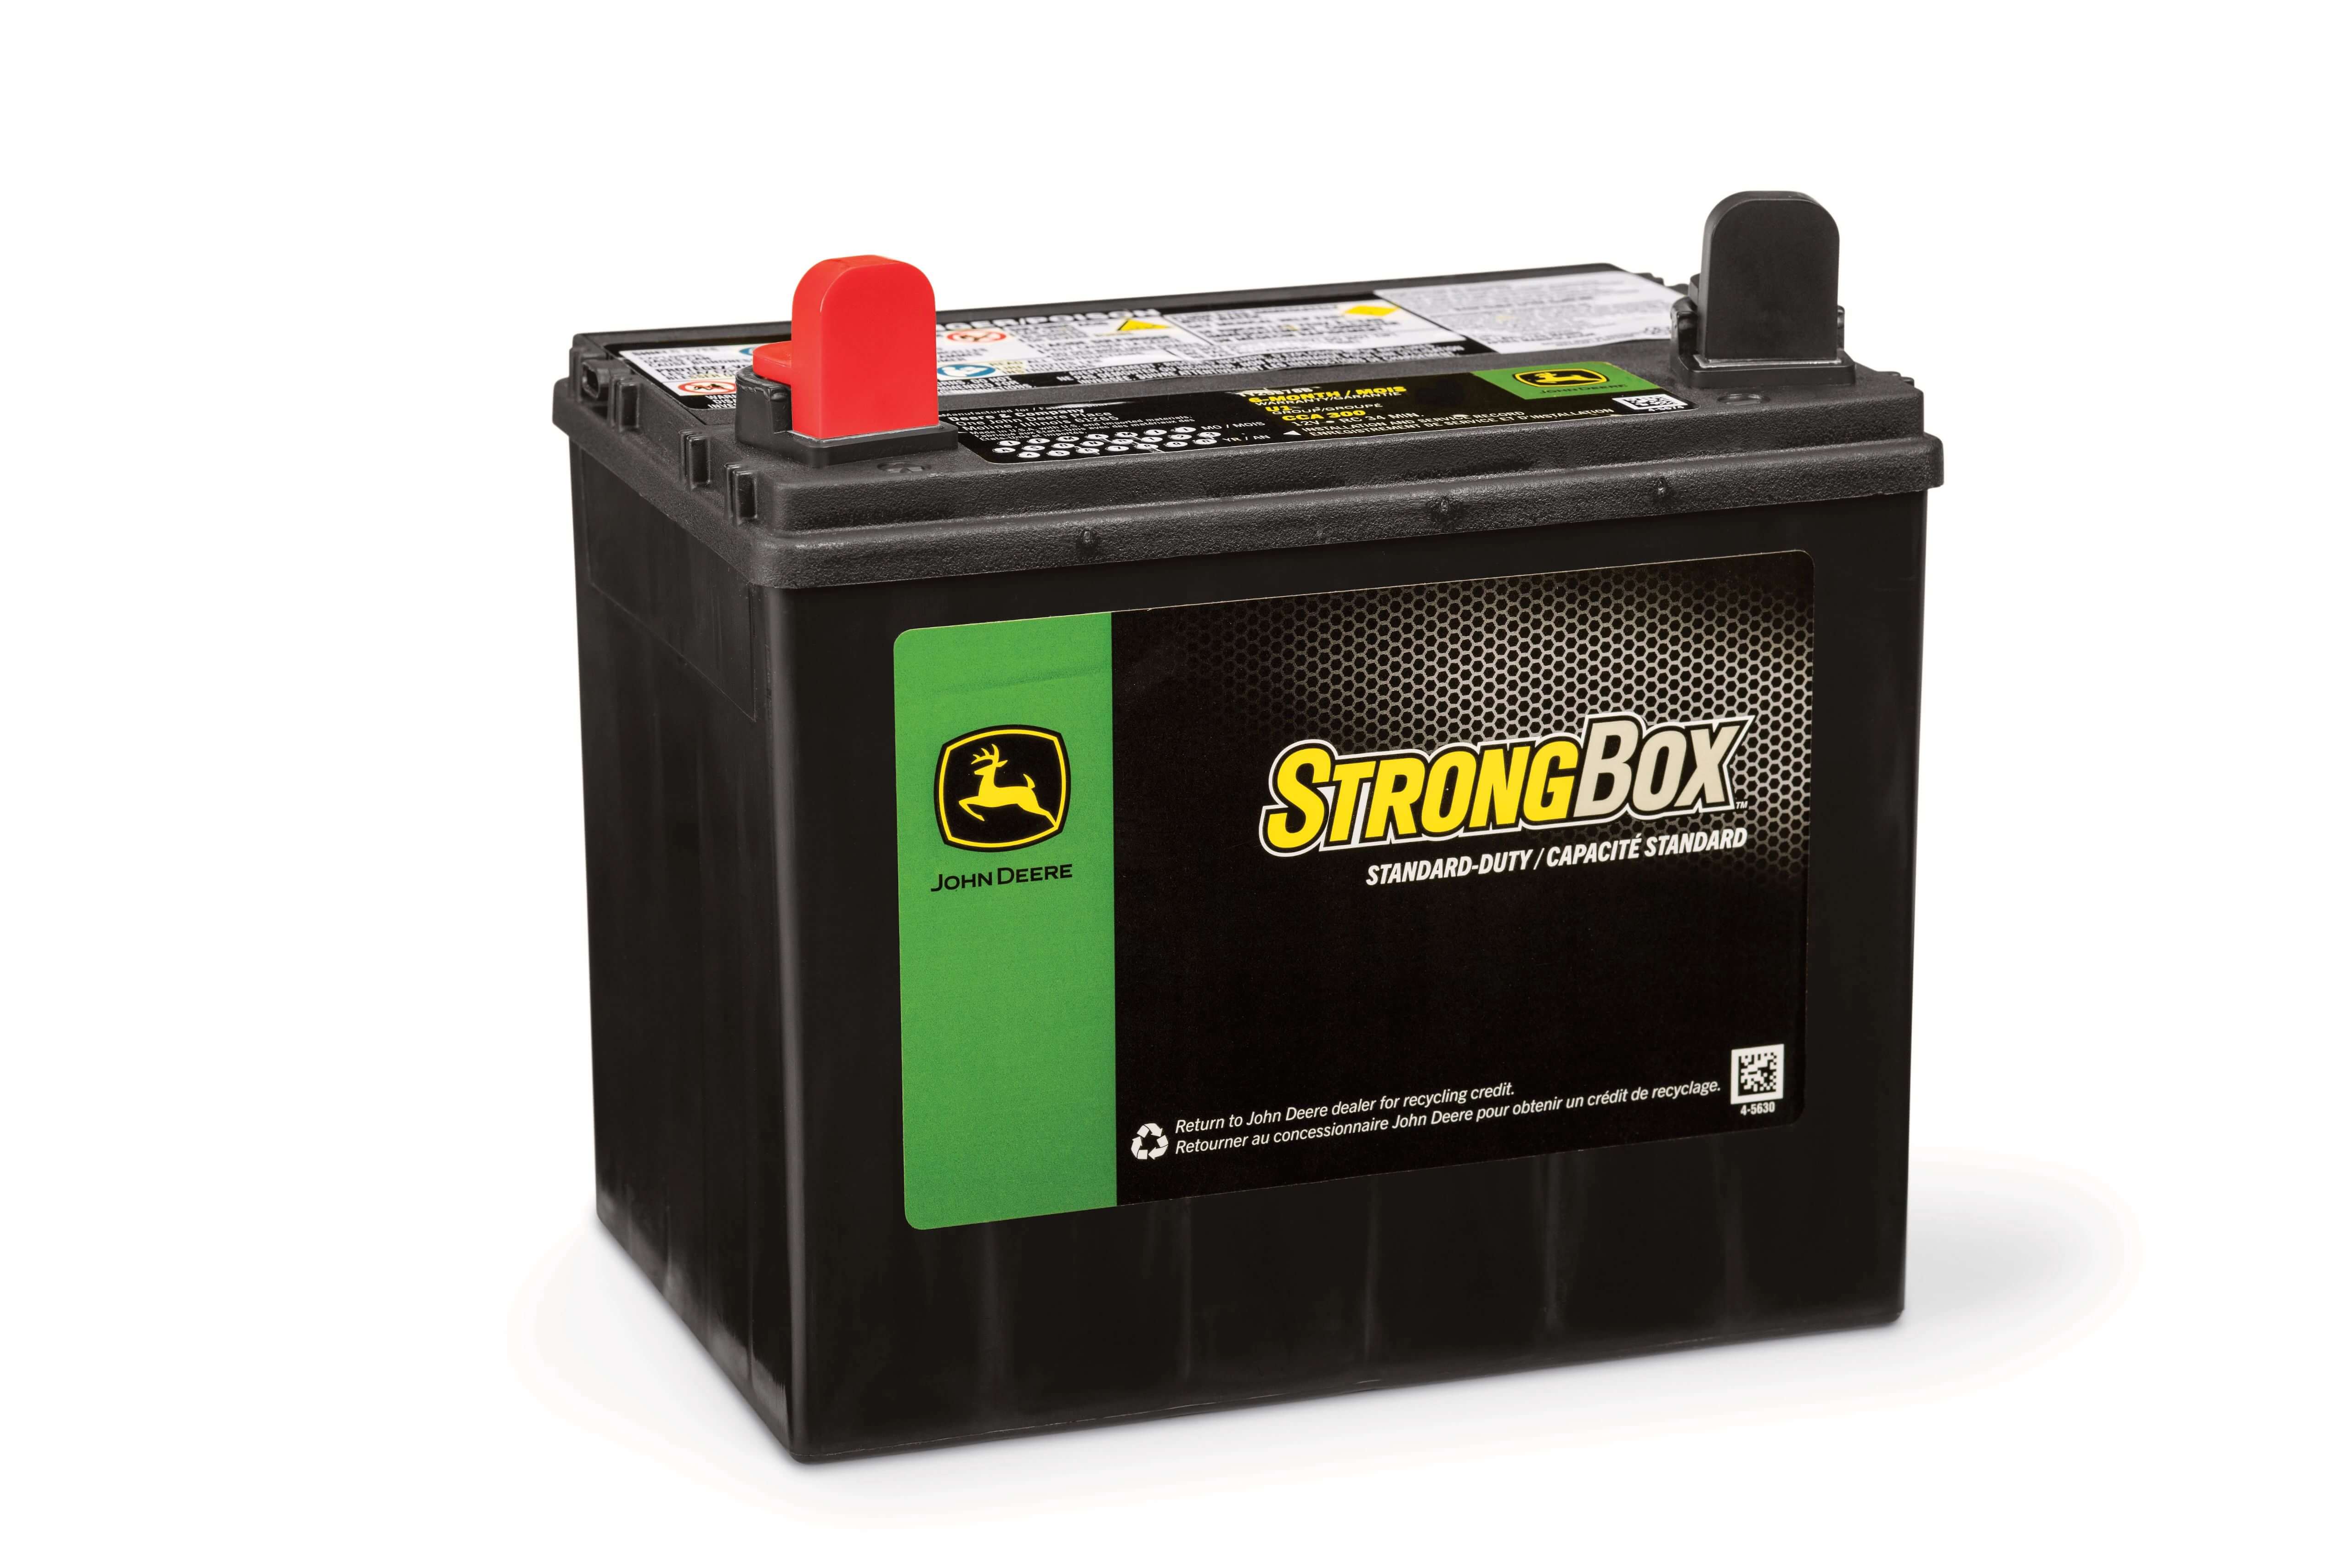 StrongBox Batteries - Wet Charged 12V - BCI U1 - TY25878B